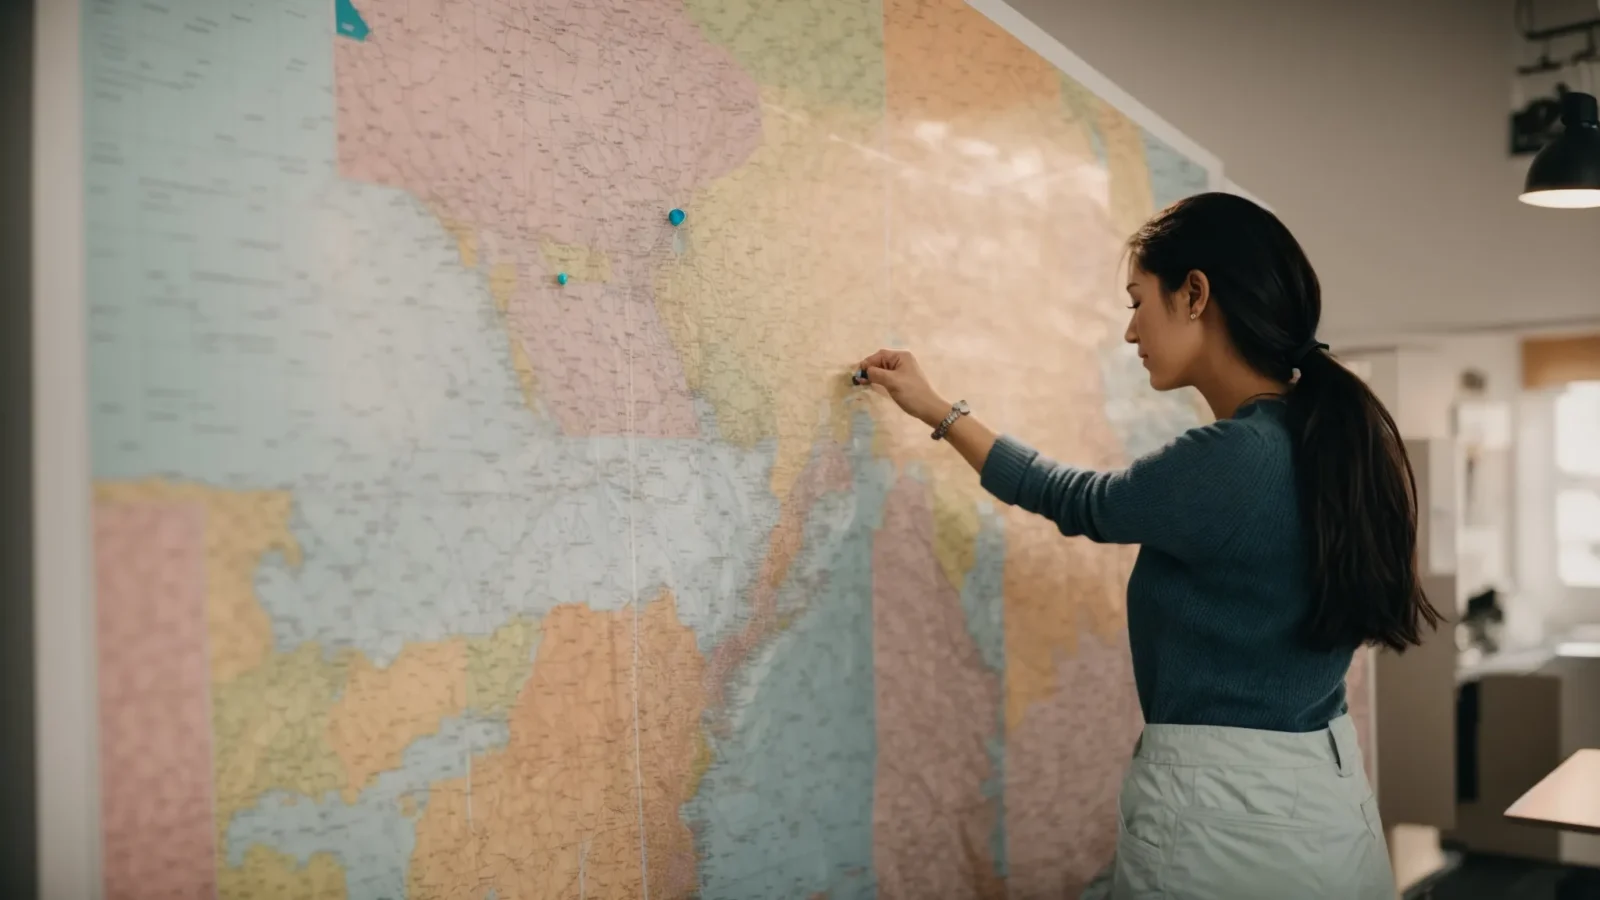 a small business owner pins a local map on the wall, marking their services area with colorful pushpins.